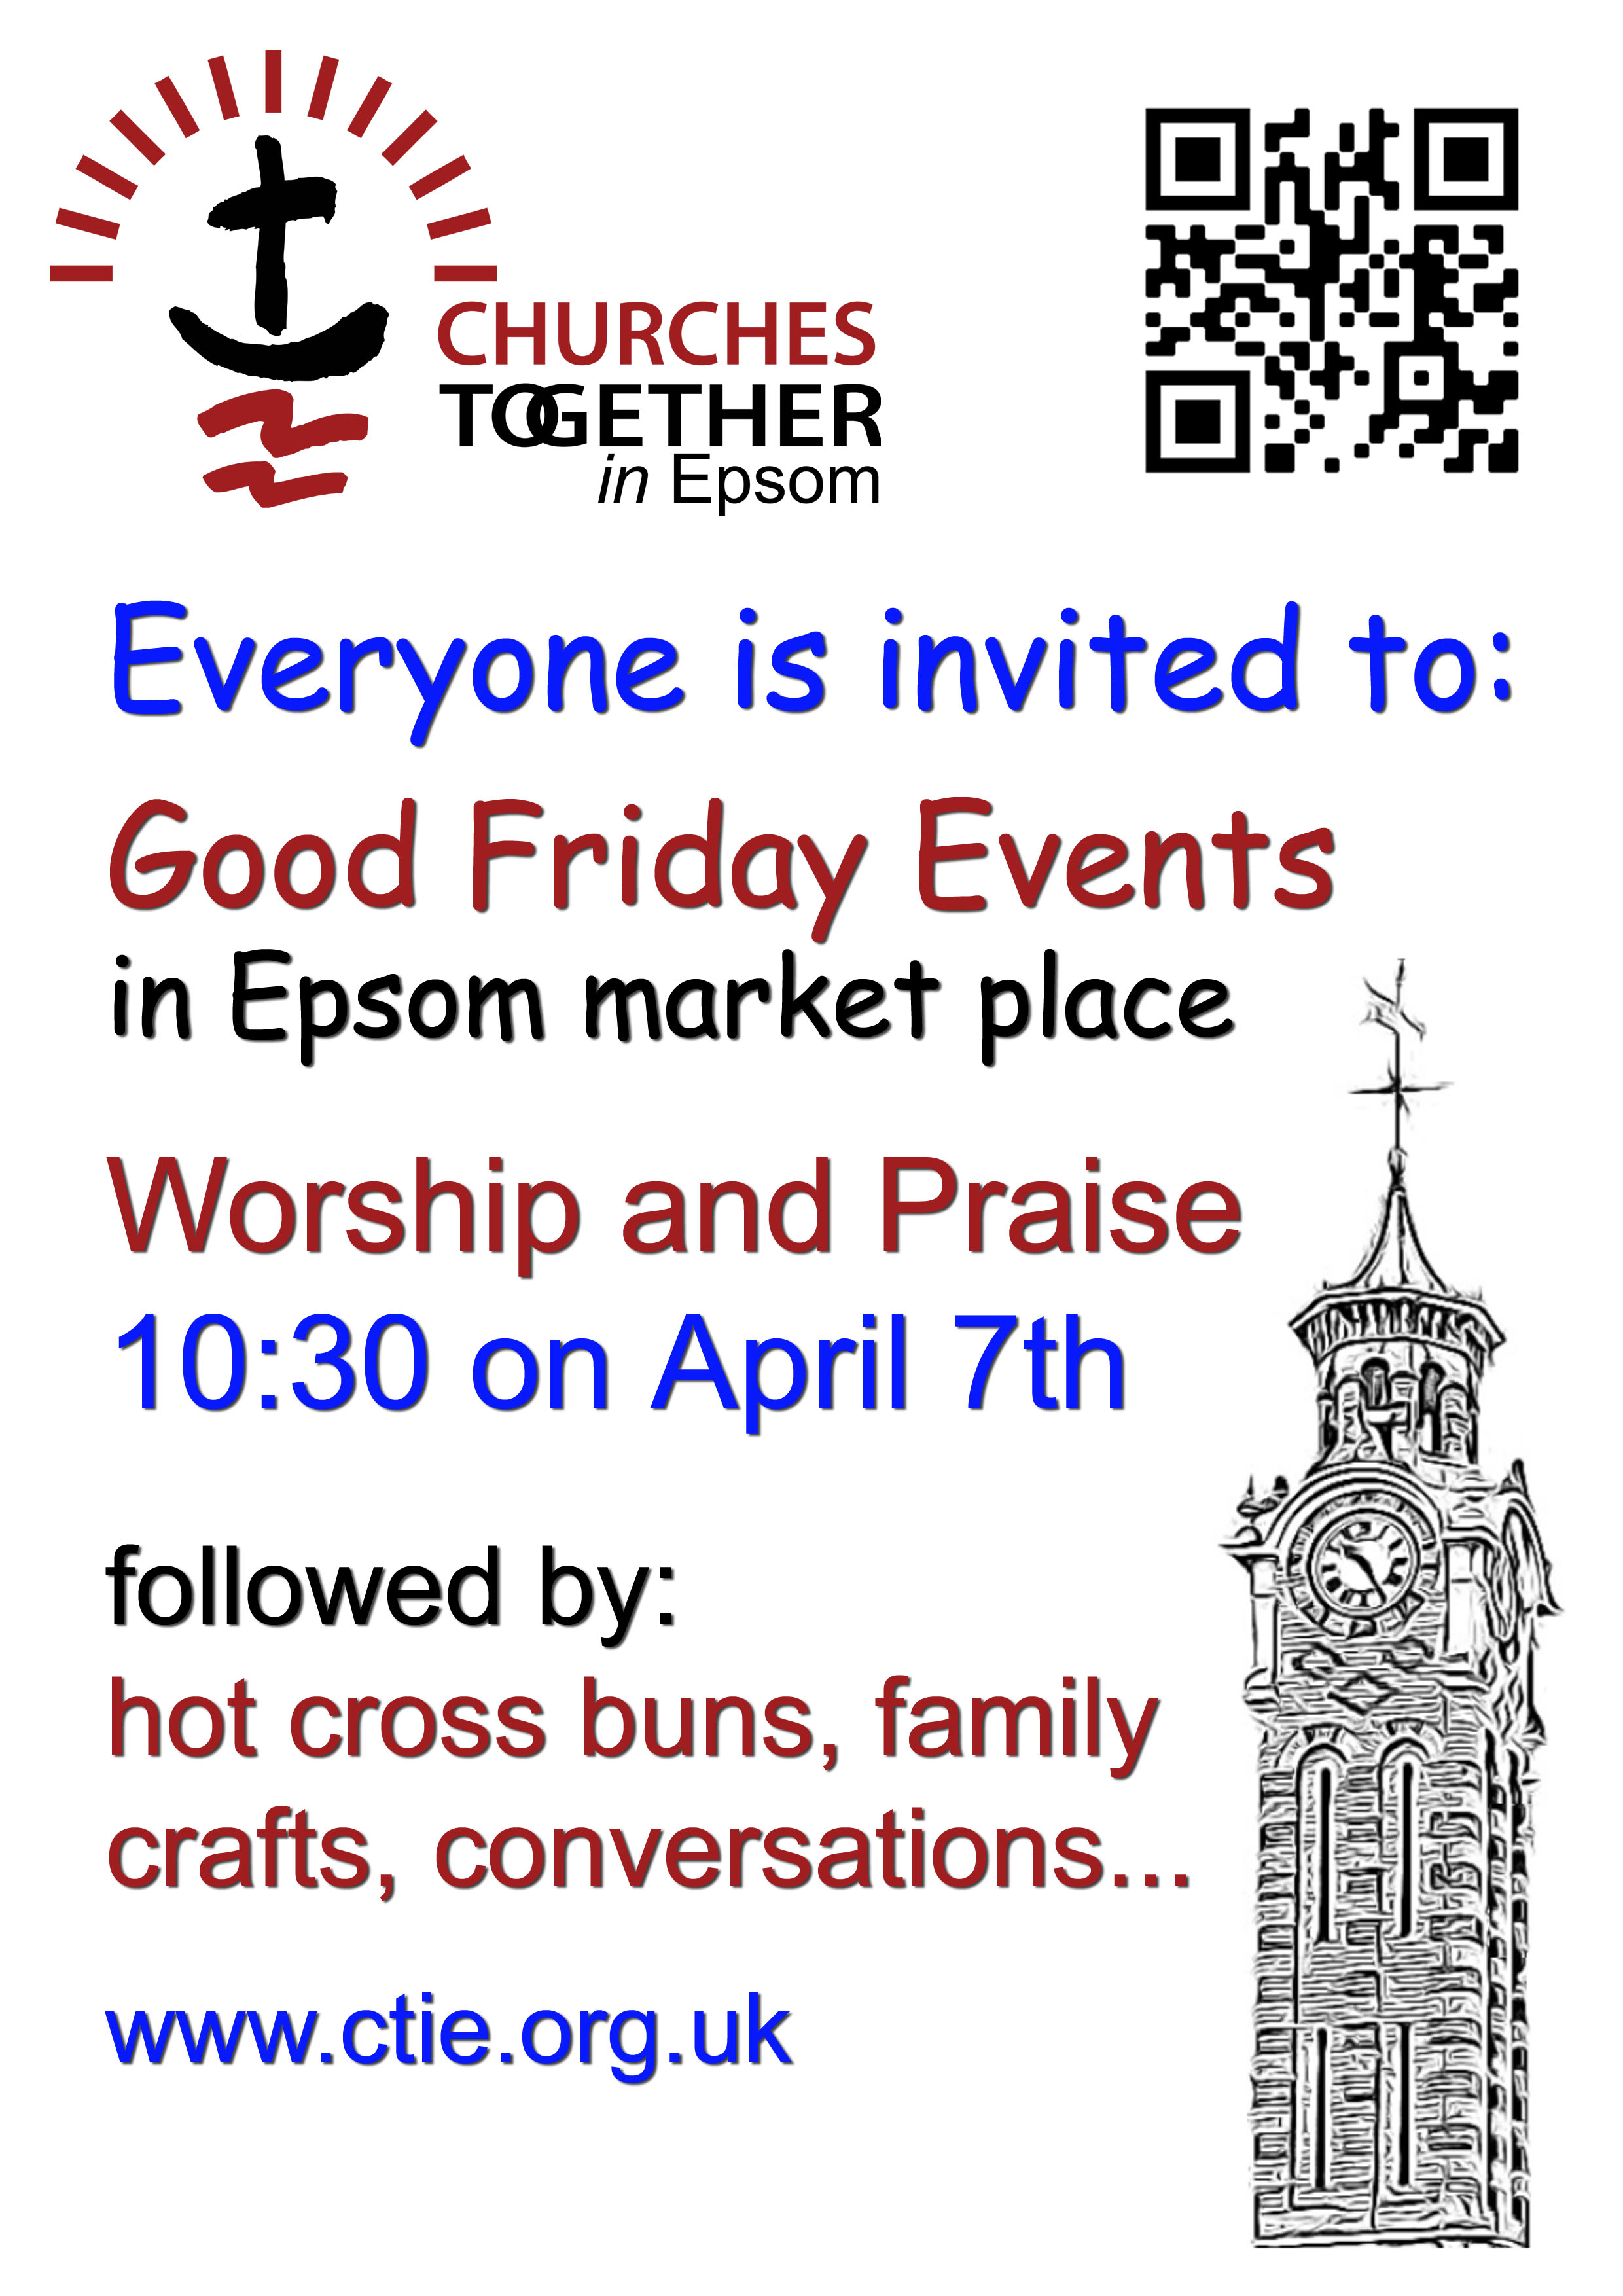 Epsom Good Friday Events in the market place